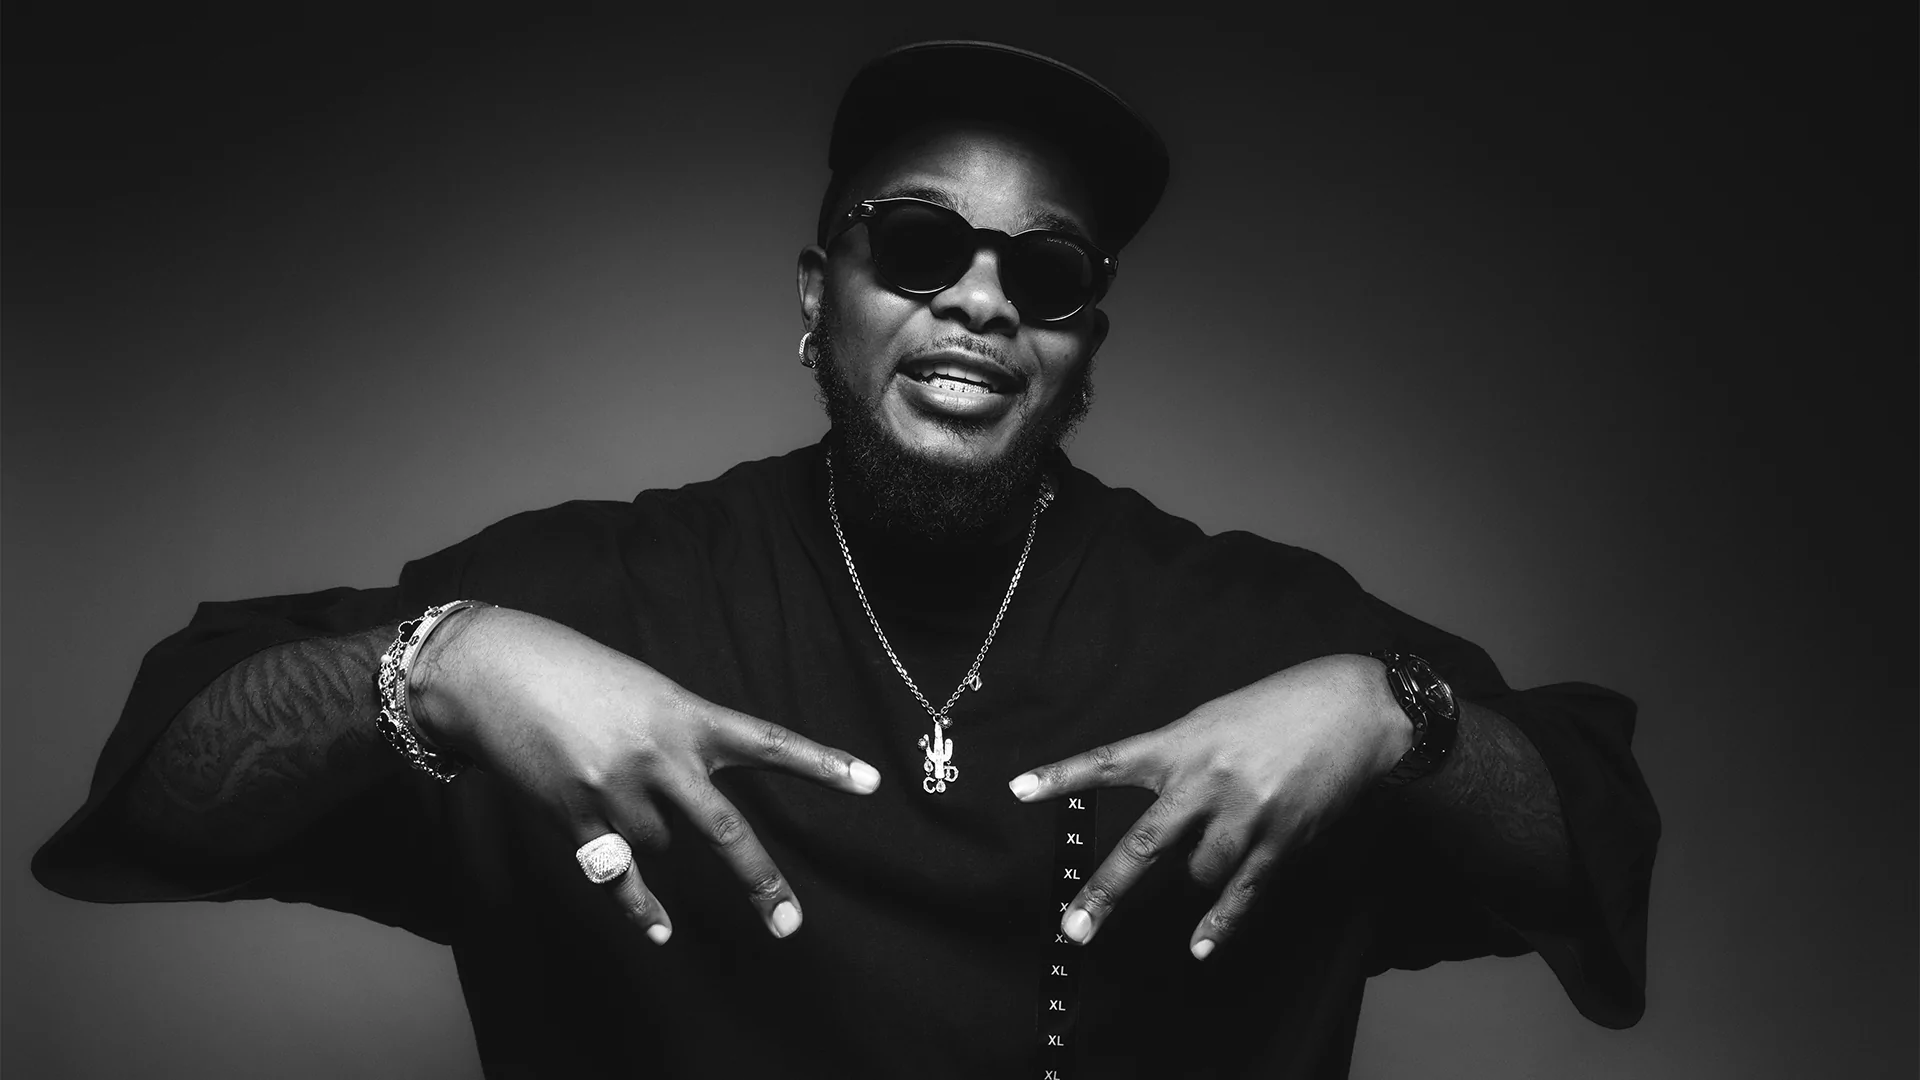 Black and white portrait of Bandile wearing grills, black sunglasses, and a chain